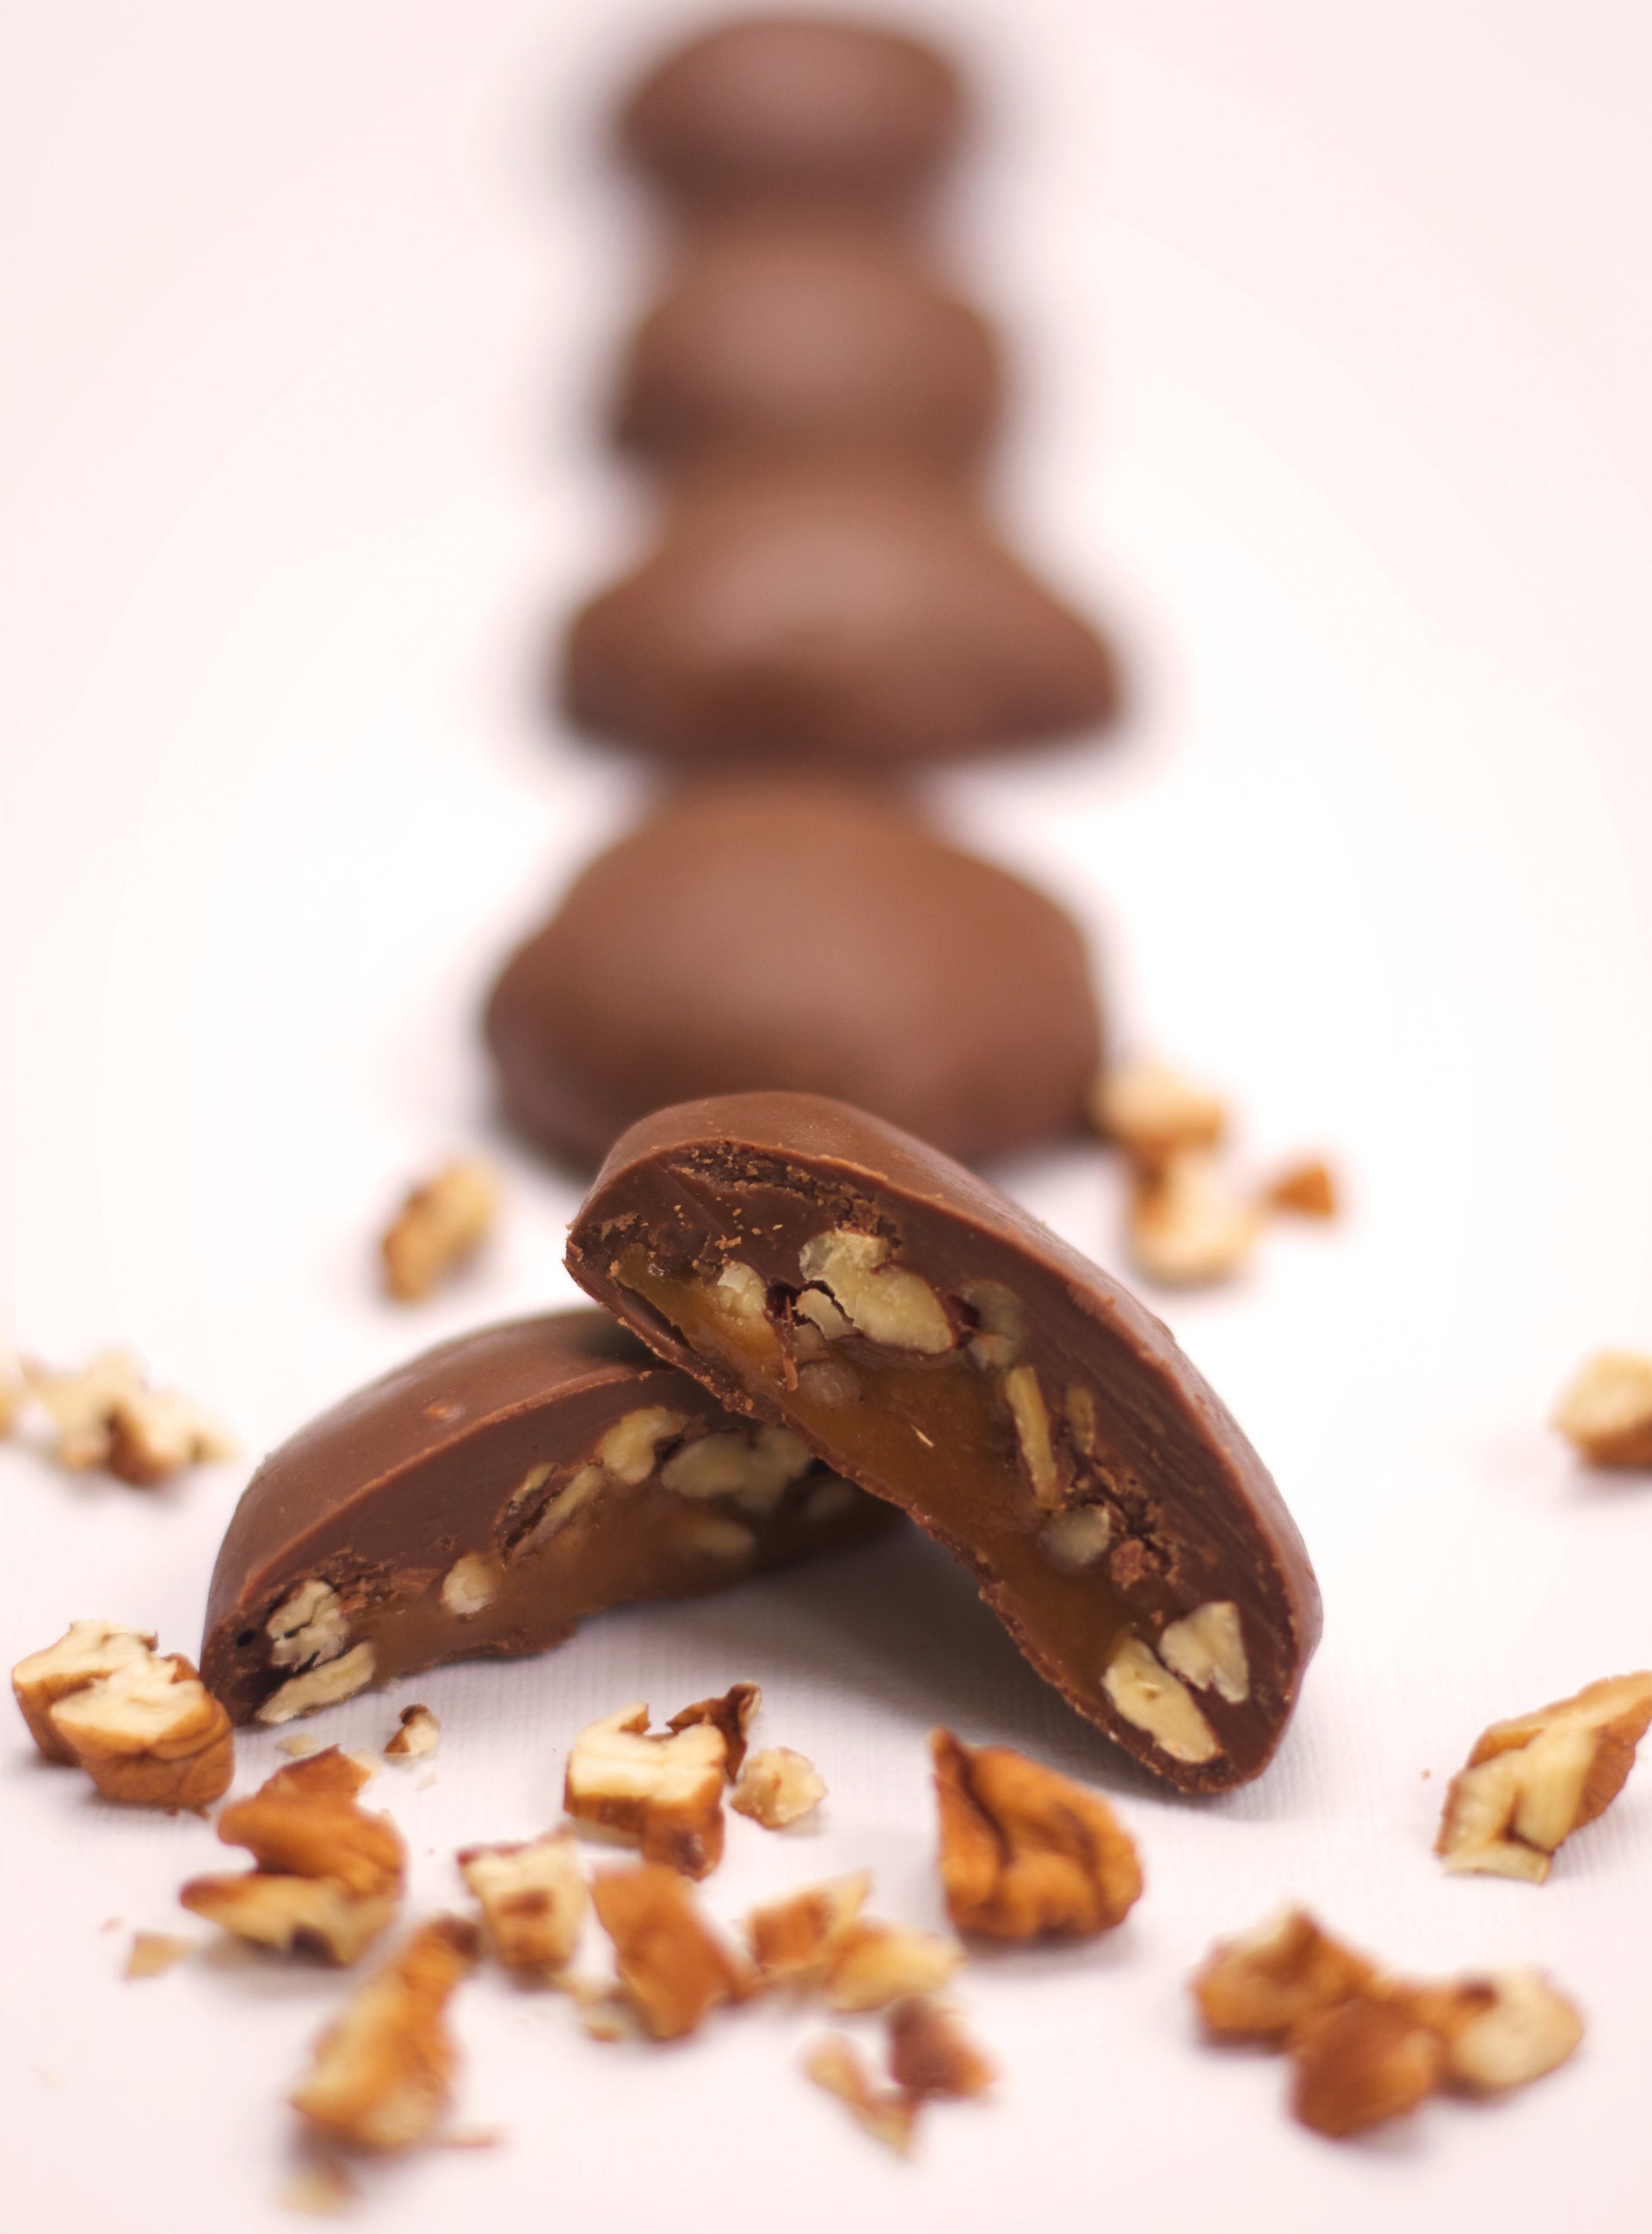 Delicious pecans covered in sweet caramel and milk chocolate. Enjoy these for yourself or send out as a gift!